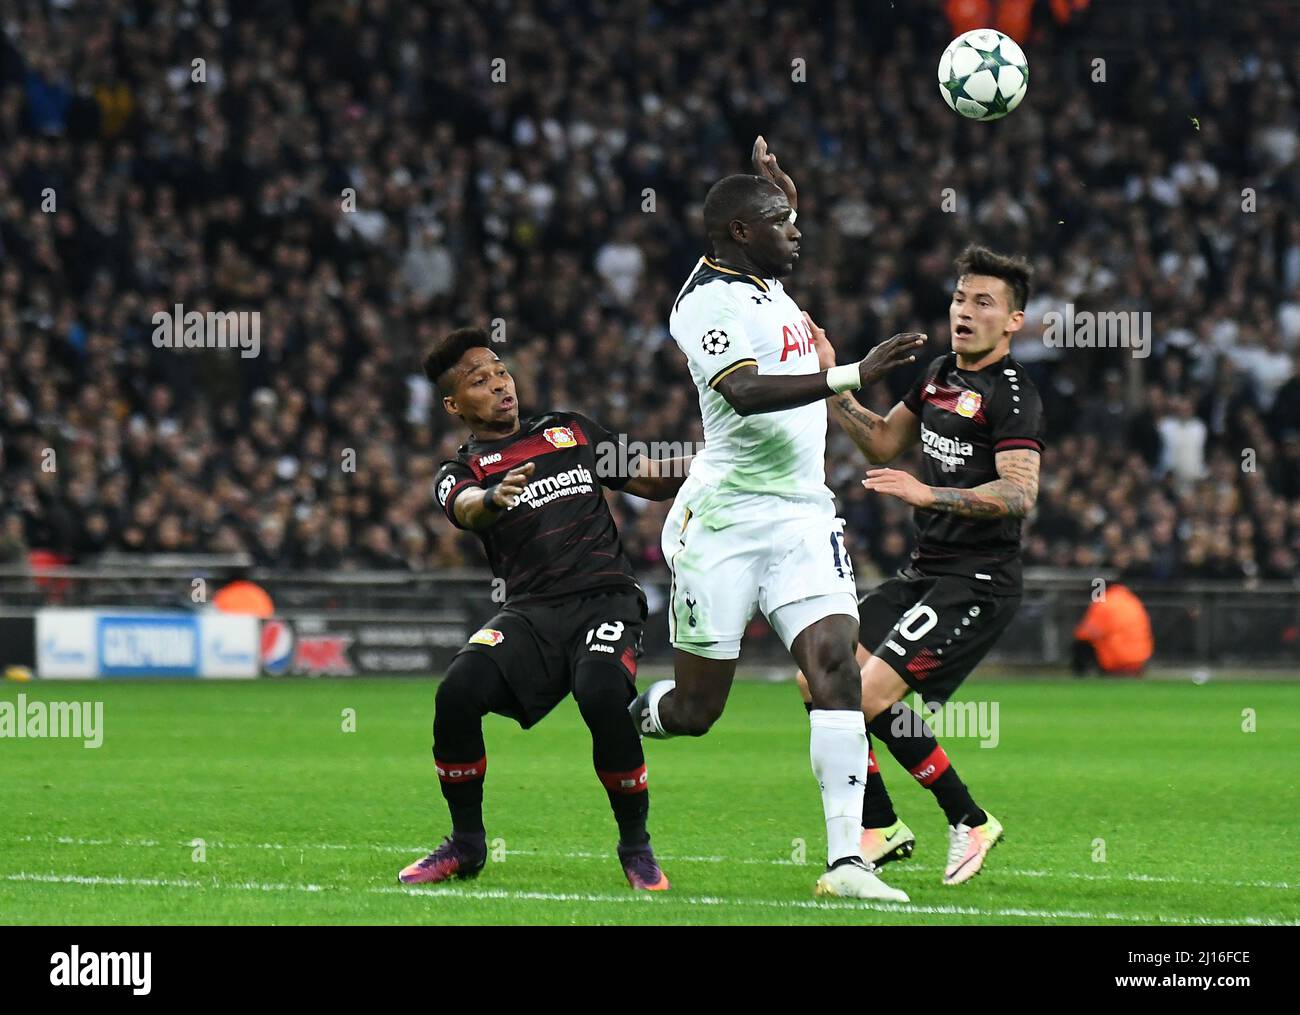 LONDON, ENGLAND - NOVEMBER 2, 2016: Wendell (L) and Charles Aranguiz (R) of Leverkusen and Moussa Sissoko (C) of Tottenham pictured in action during the UEFA Champions League Group E game between Tottenham Hotspur and Bayern Leverkusen at Wembley Stadium. Copyright: Cosmin Iftode/Picstaff Stock Photo